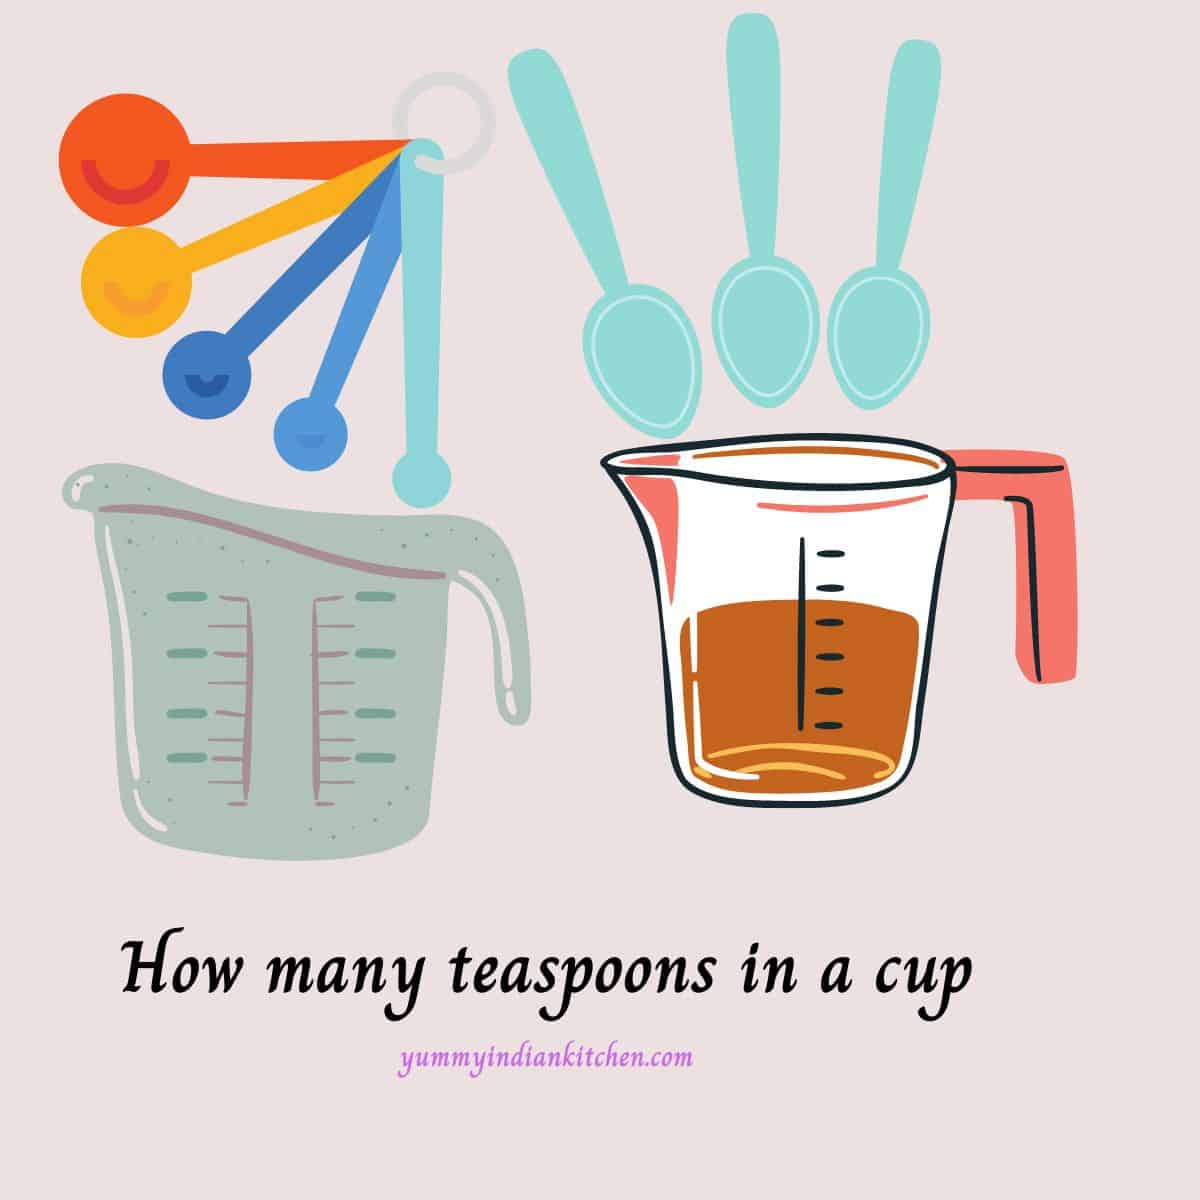 how many teaspoons are in a cup representation with teaspoons and cups